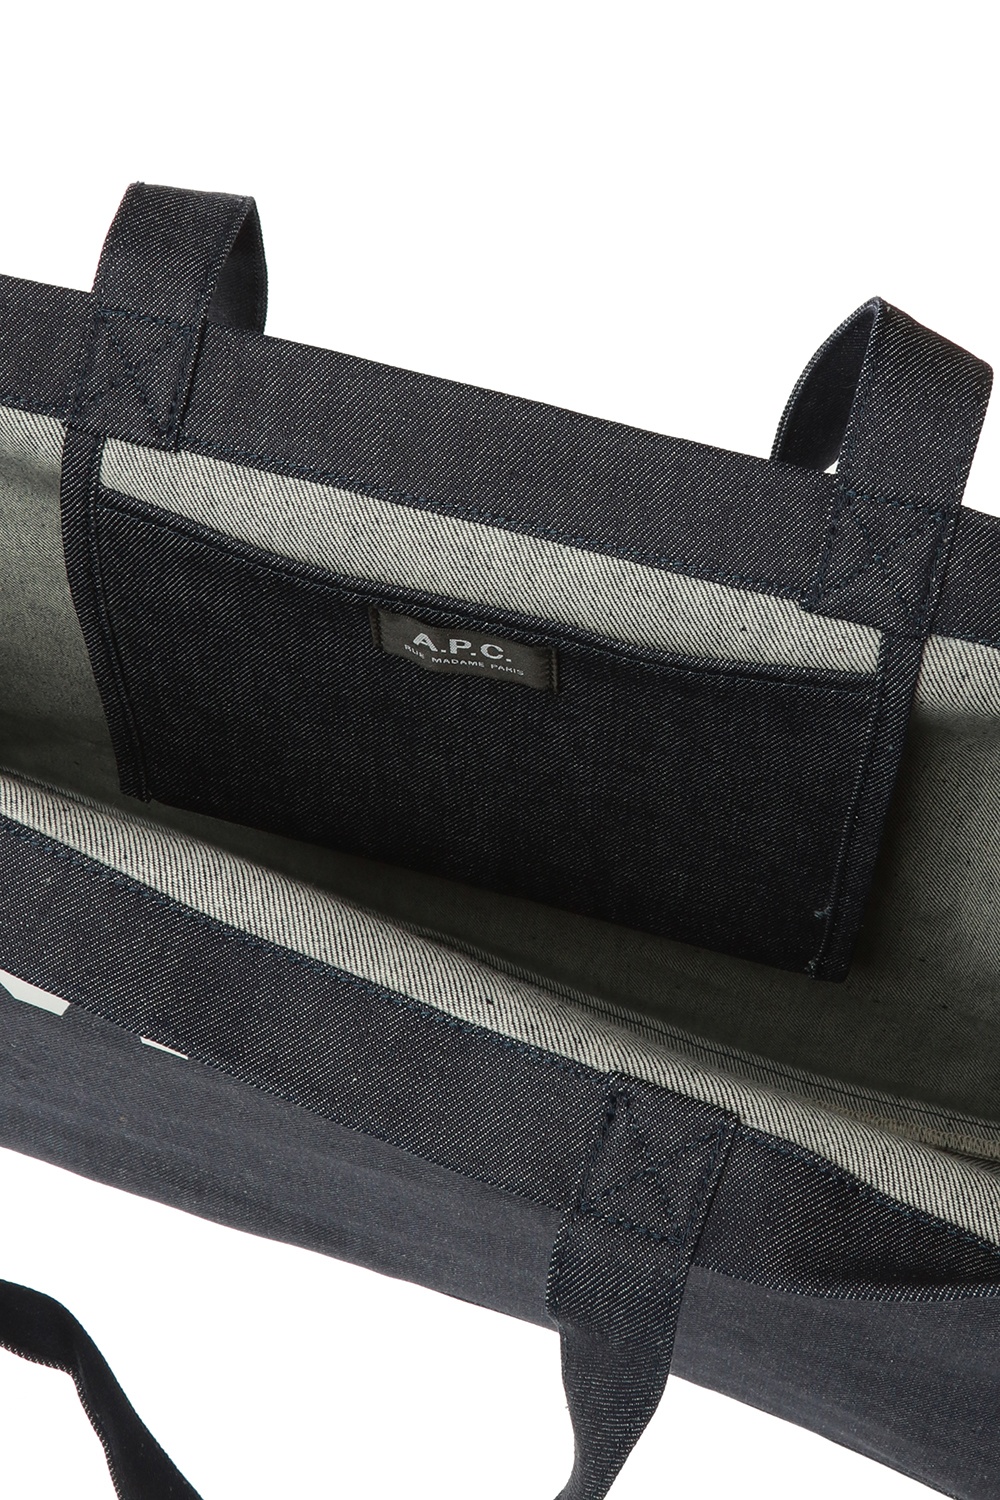 A.P.C. Bag the cosy on The Sole Womens app and be up-to-date with Air Jordans latest drops